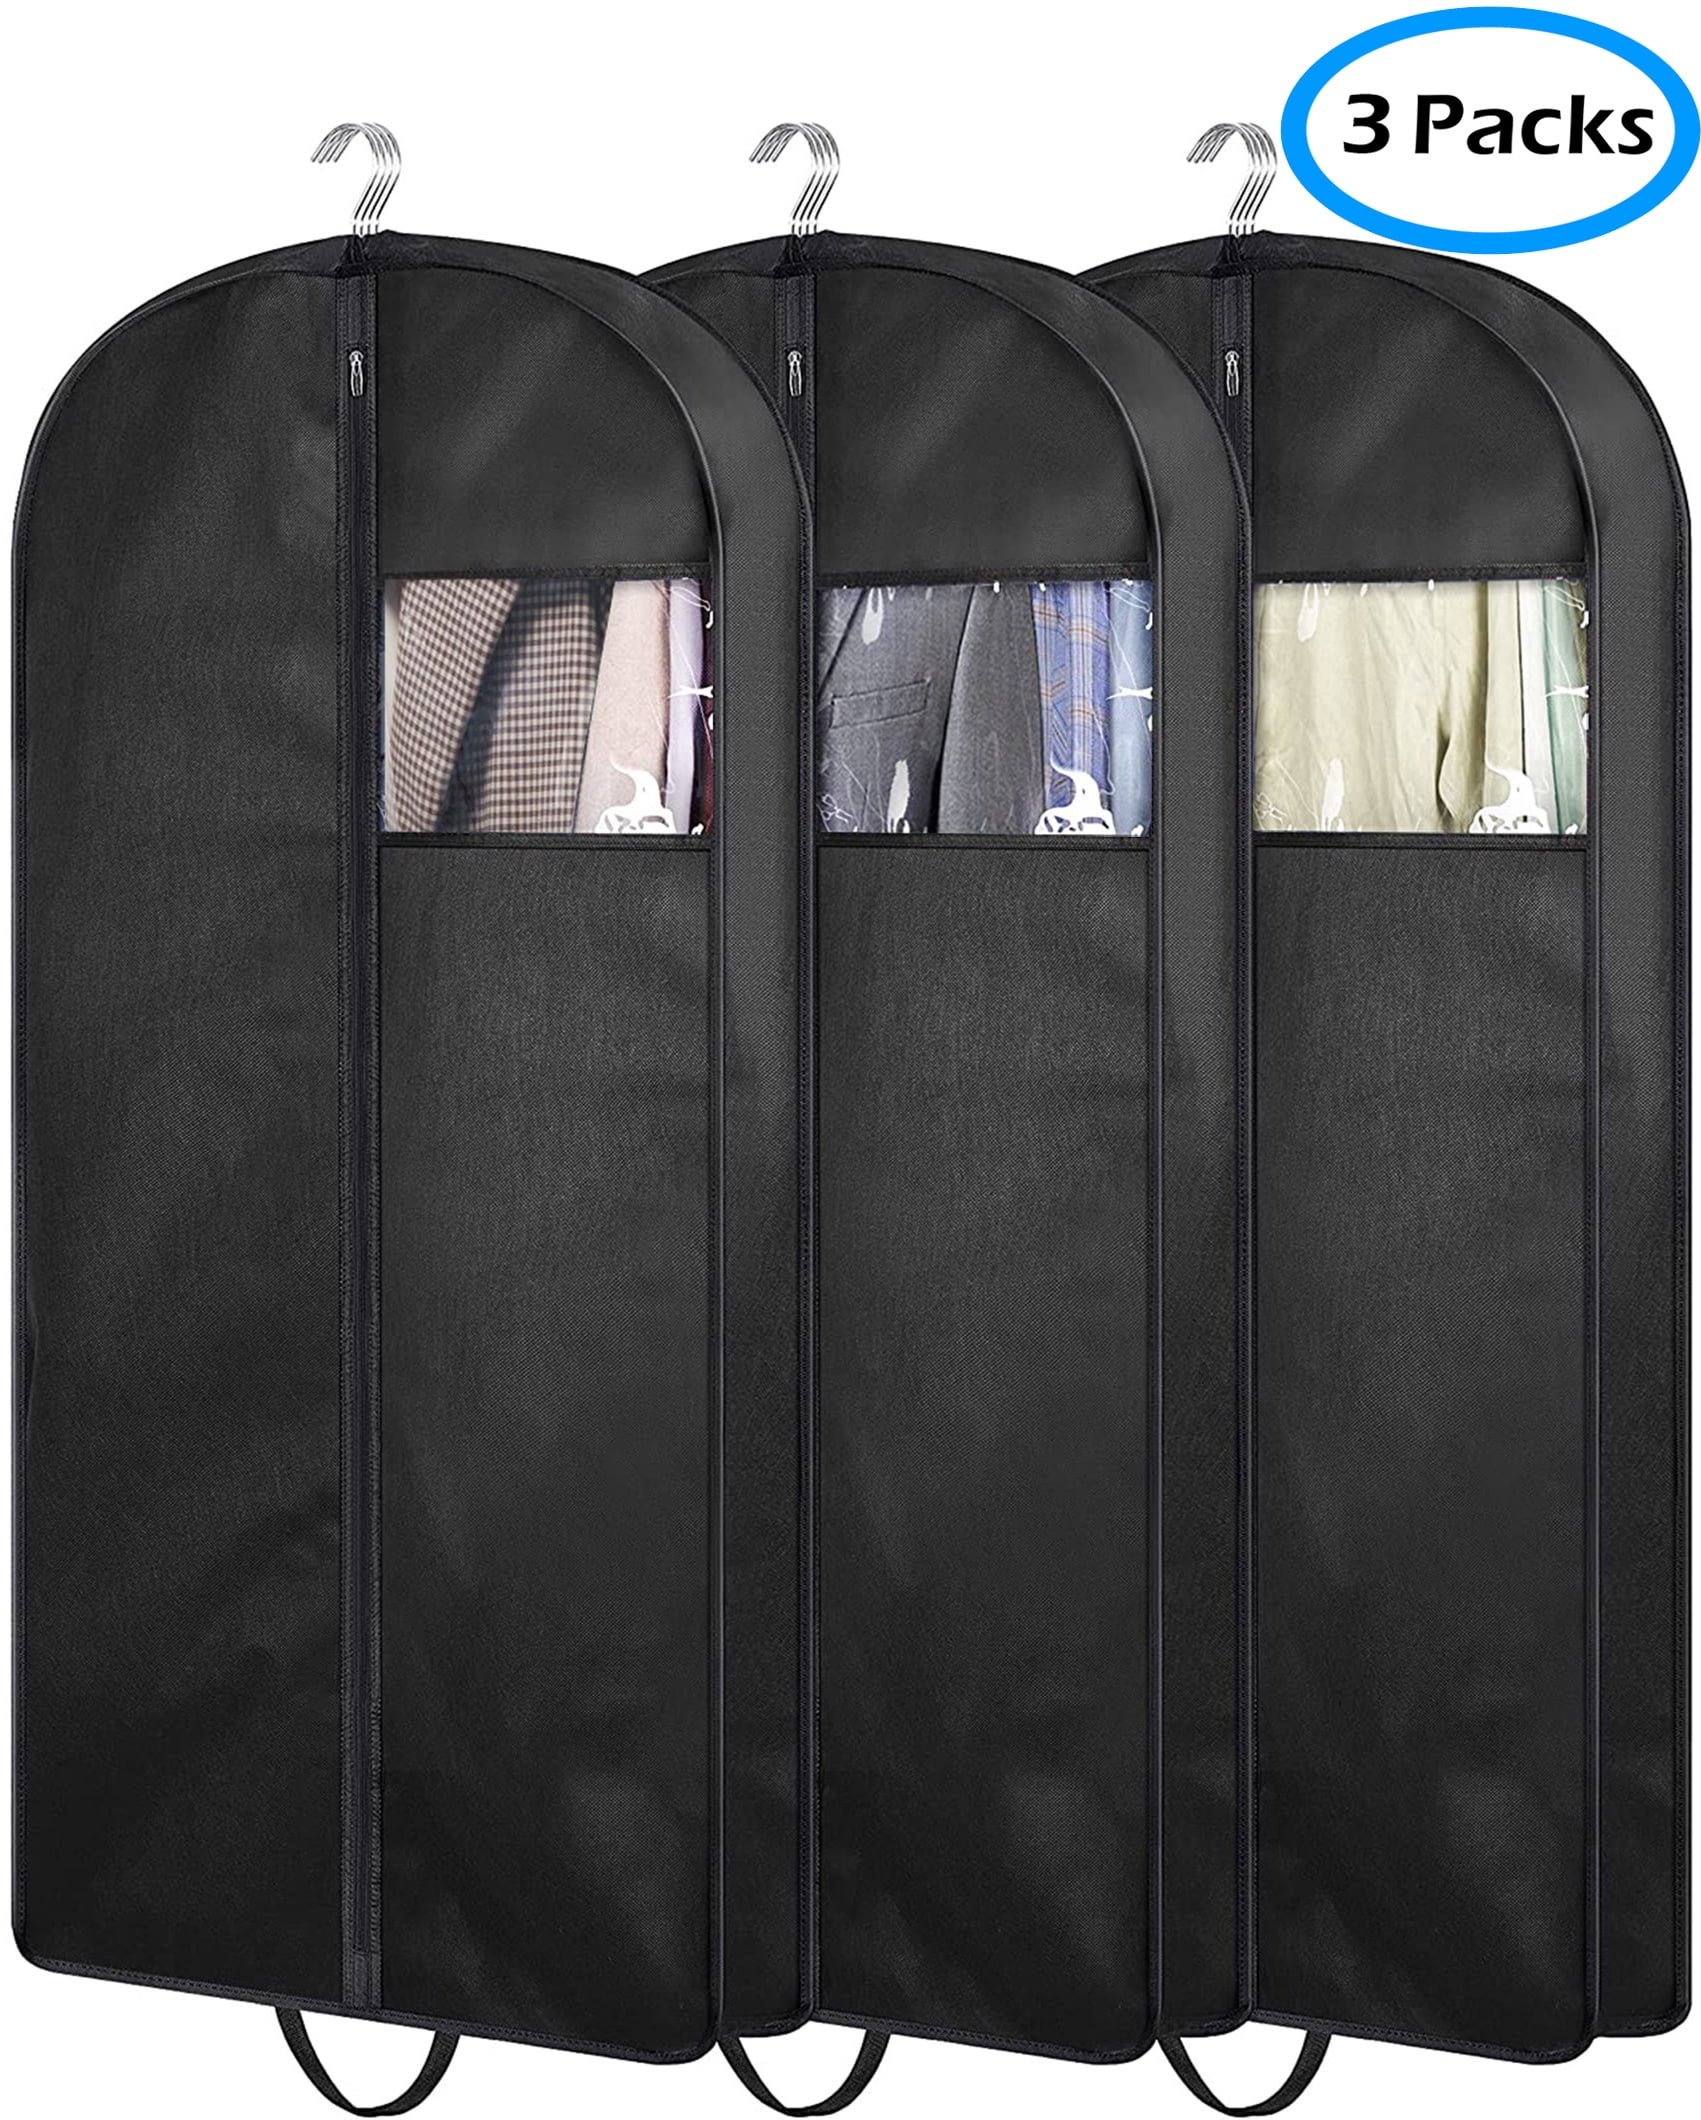 Garment Bag, 43 Suit Bag, Hanging Garment Bags for Travel and Closet  Storage, Gusseted Suit Cover G…See more Garment Bag, 43 Suit Bag, Hanging